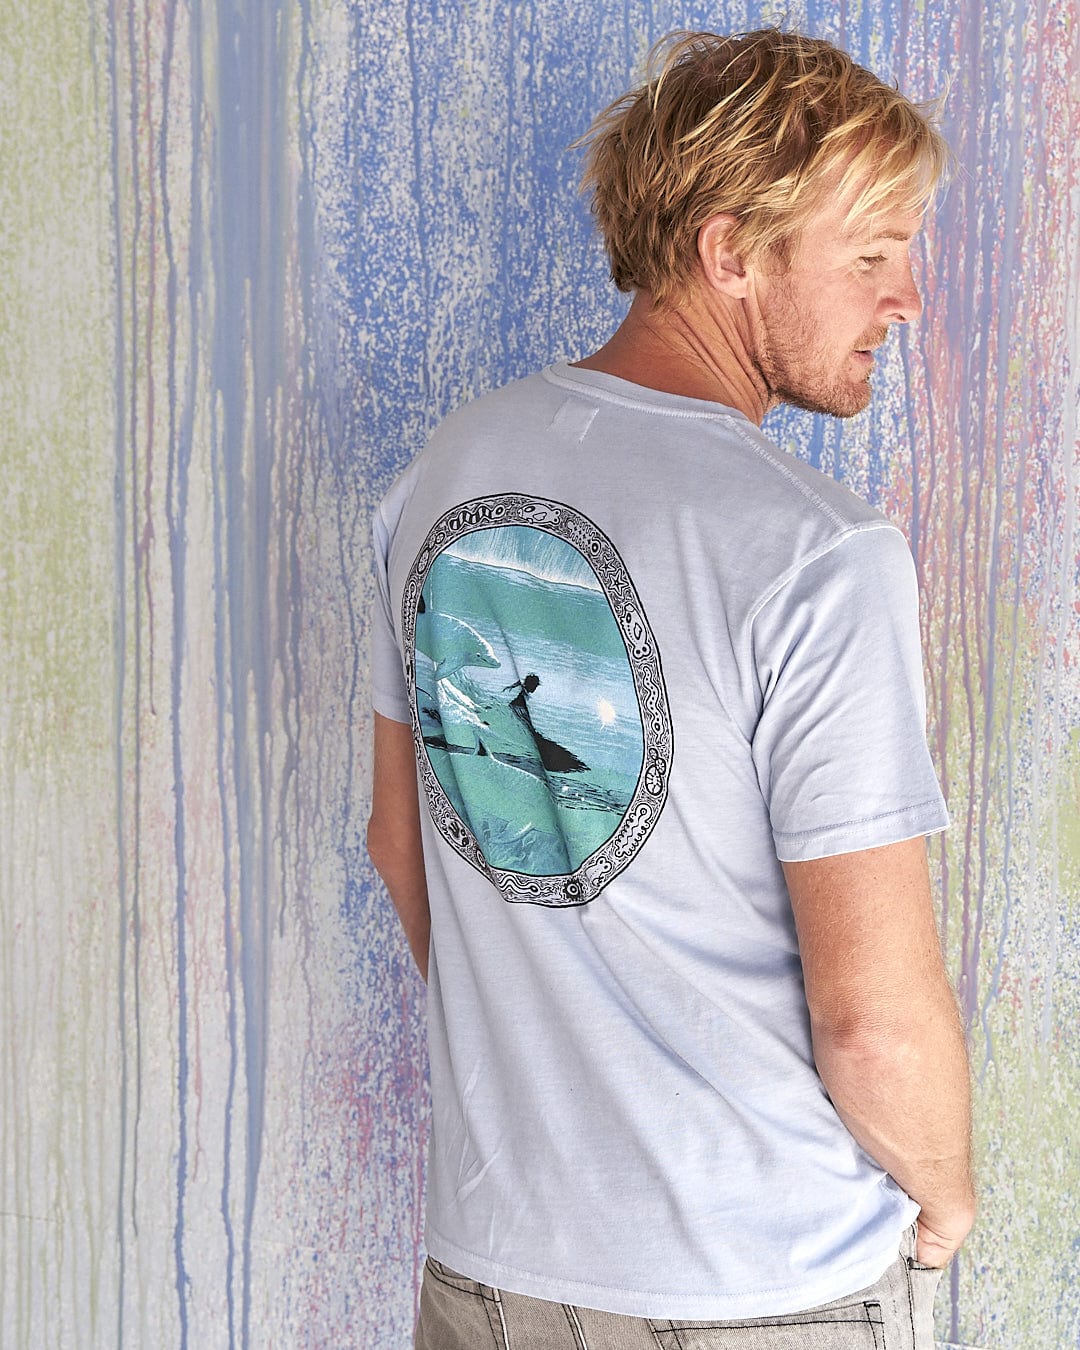 The back of a man wearing a Saltrock Dolphin - Limited Edition 35 Years T-Shirt.